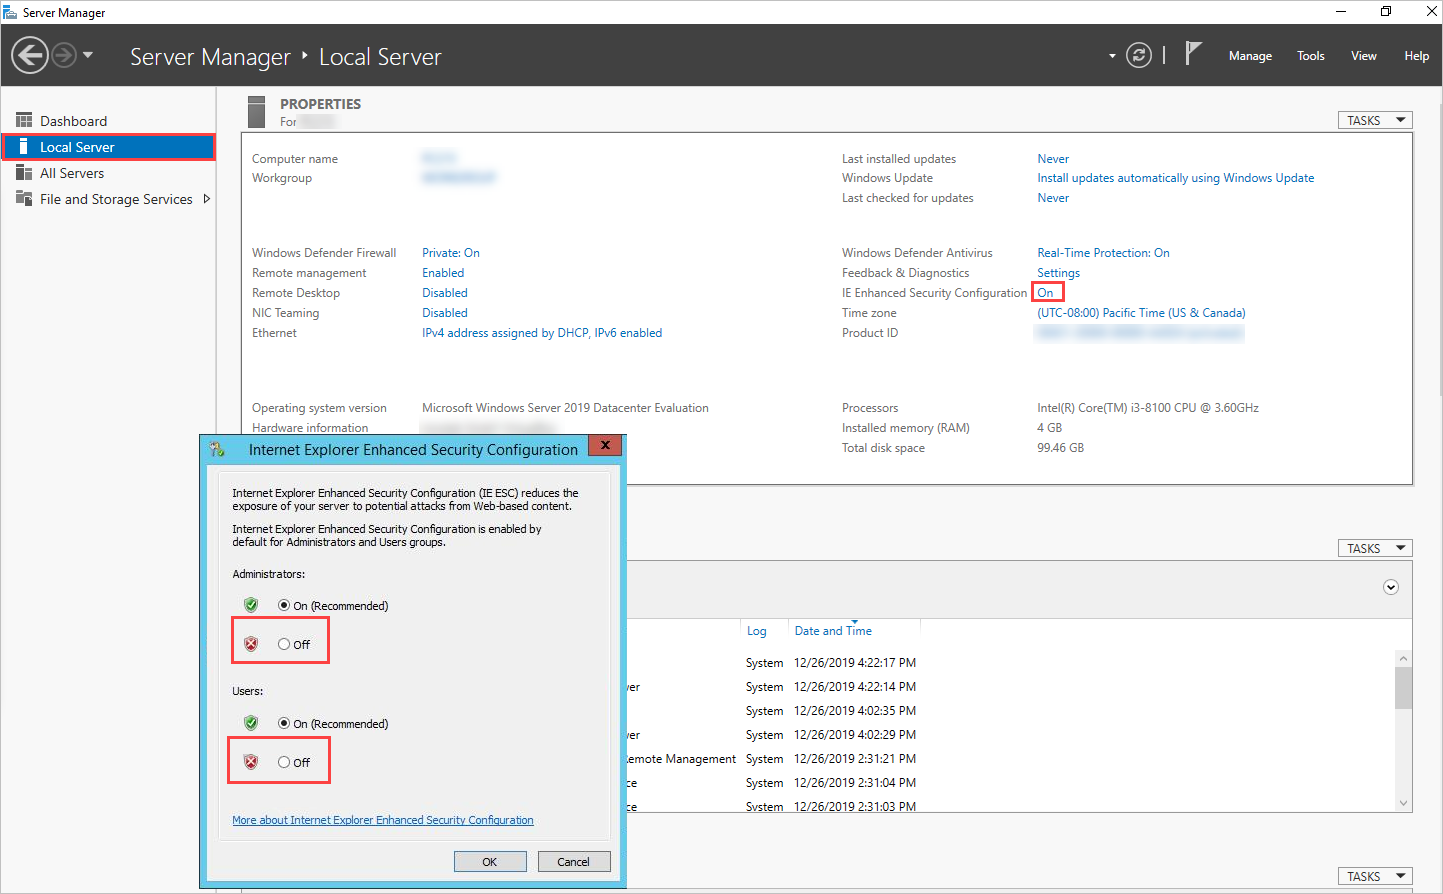 Screenshot of the IEESC feature in the Internet Explorer Local server settings.